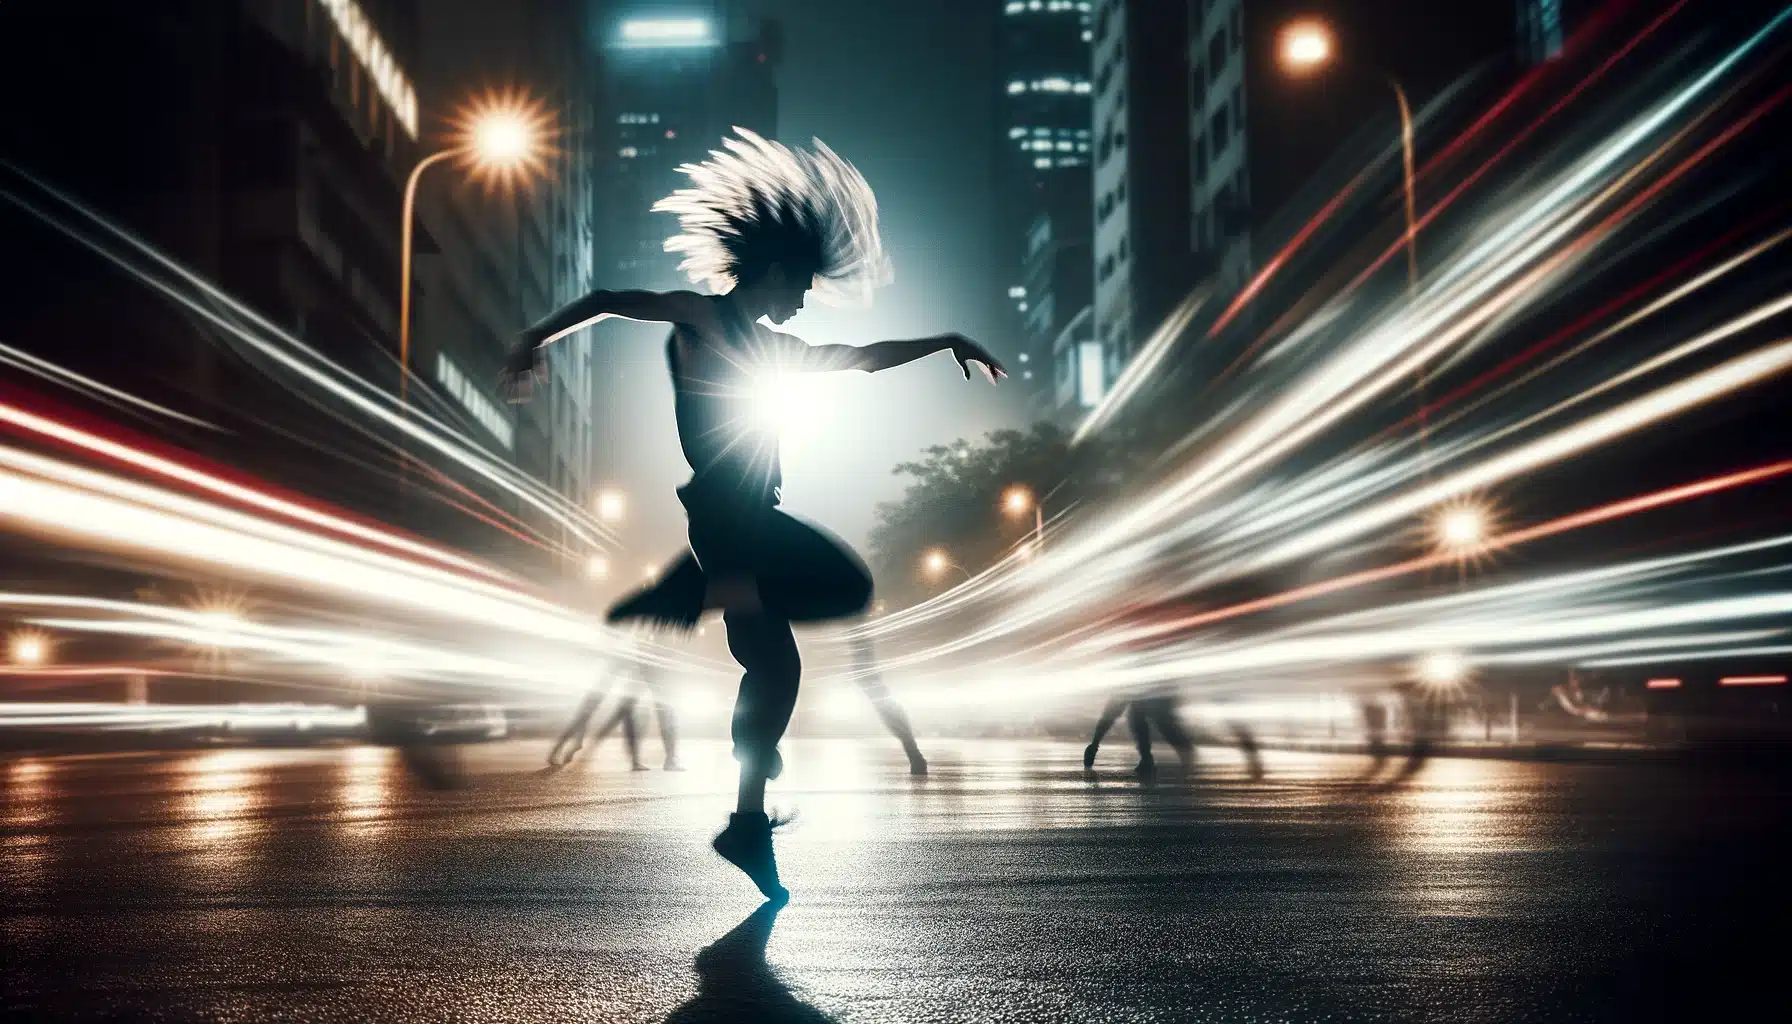 Dancer in sharp focus with motion blur background in an urban night setting, showcasing dynamic movement.